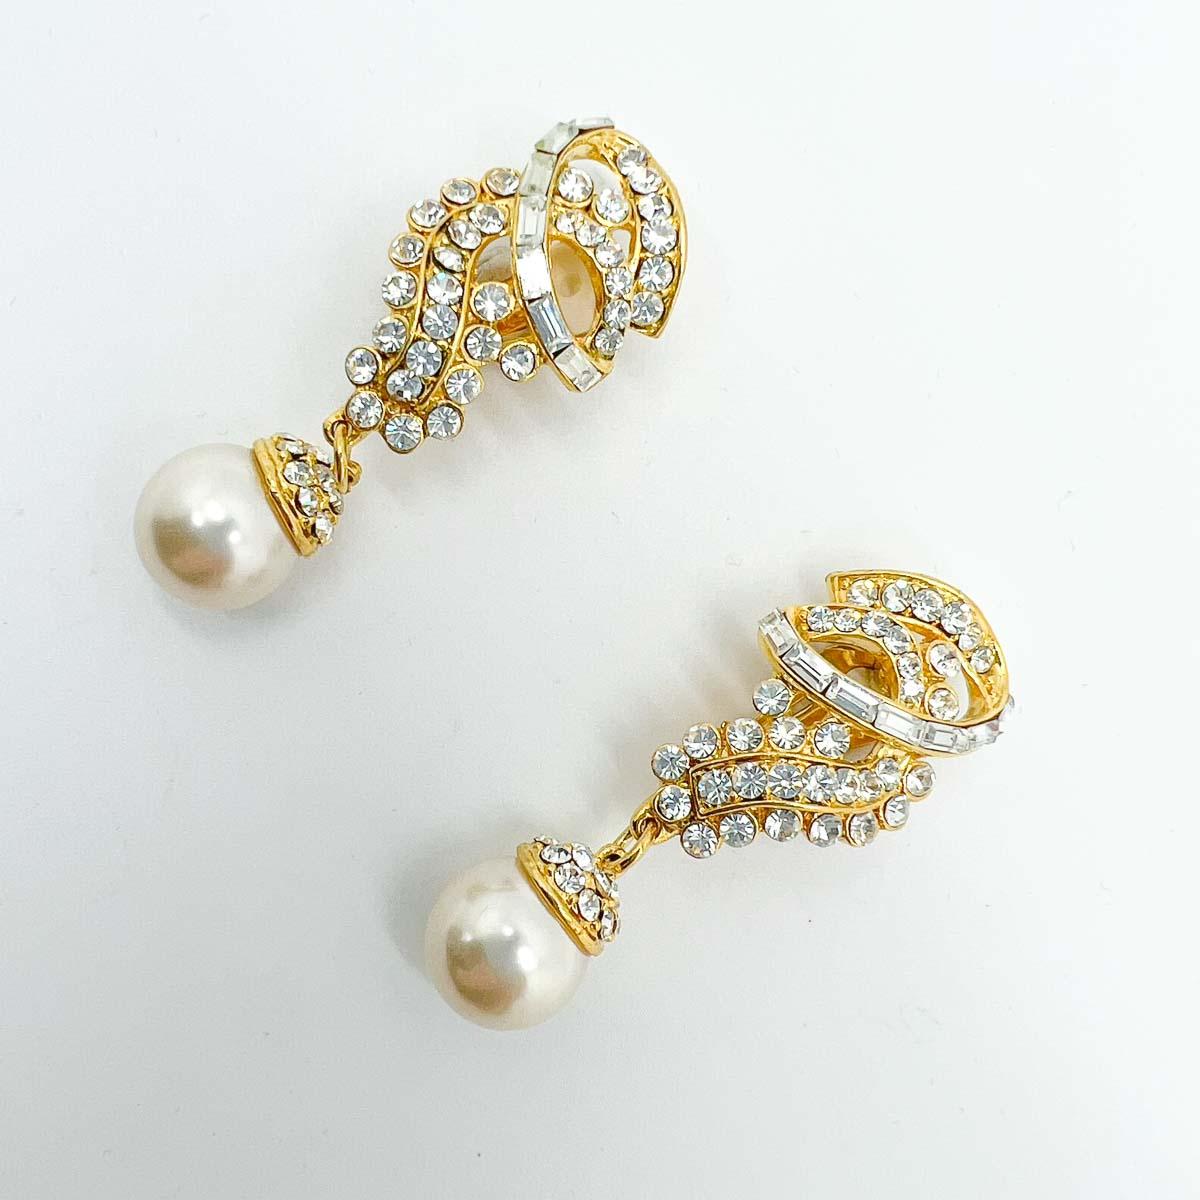 Vintage 'Diana' Style Twist Pearl Droplet Earrings 1990s In Good Condition For Sale In Wilmslow, GB